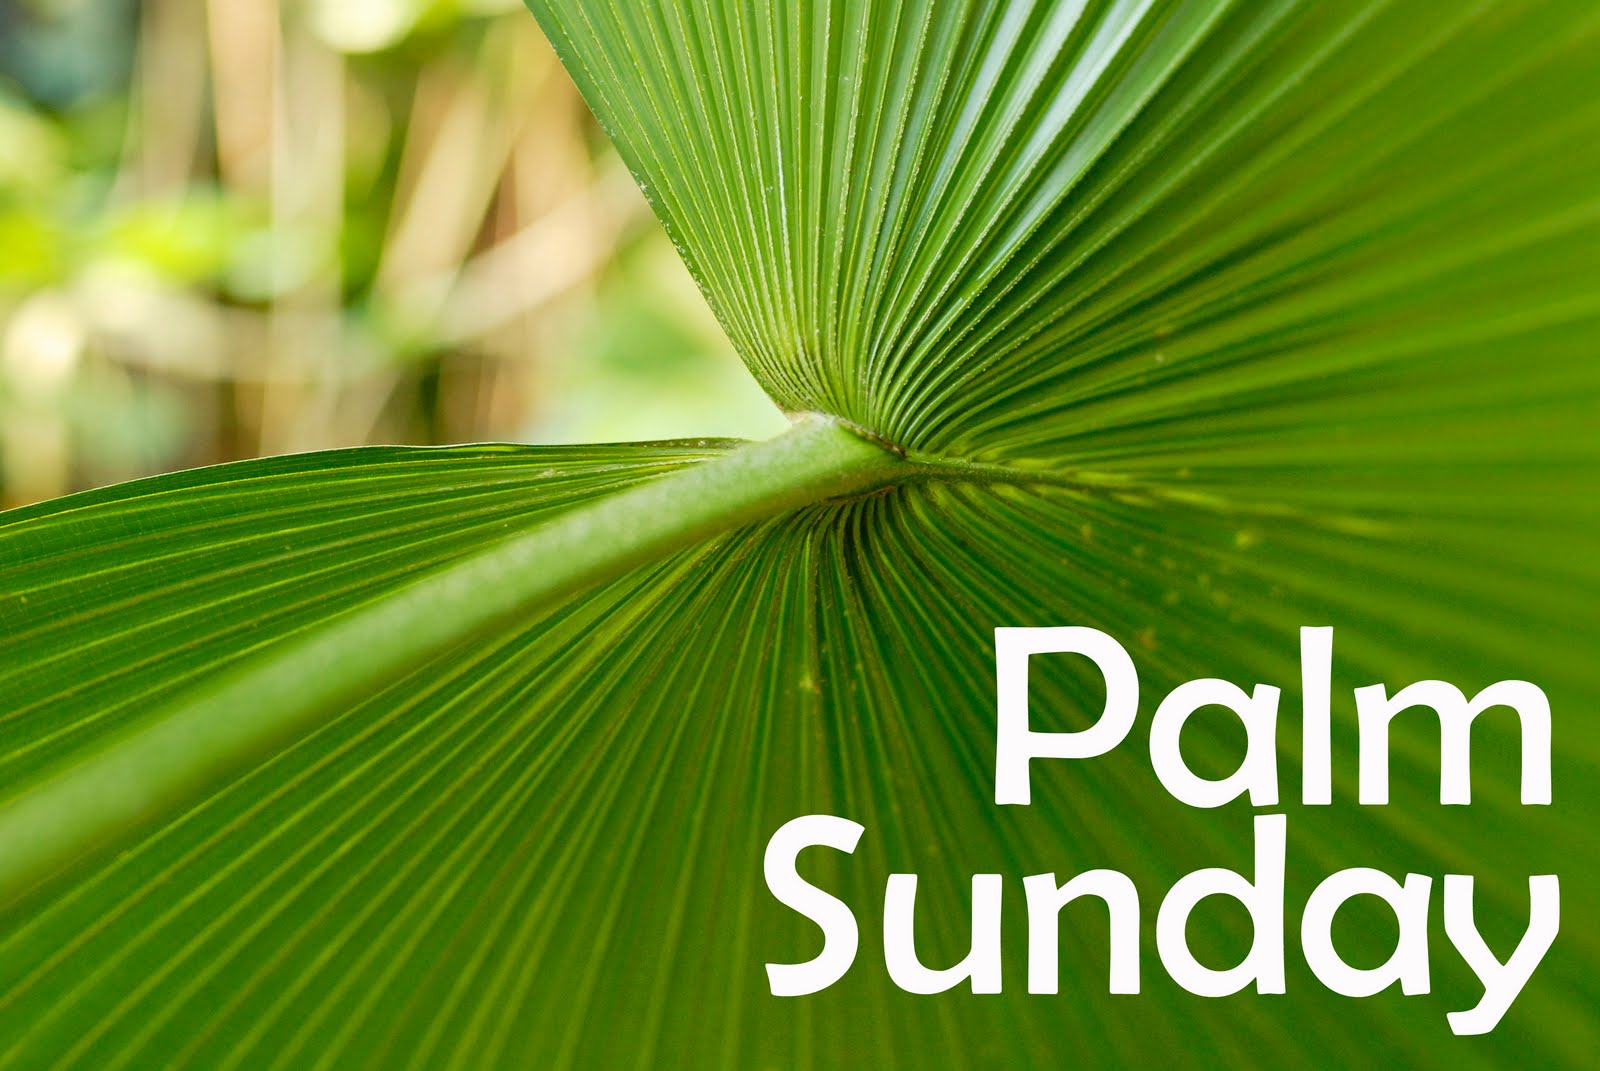 free christian clipart for palm sunday - photo #35